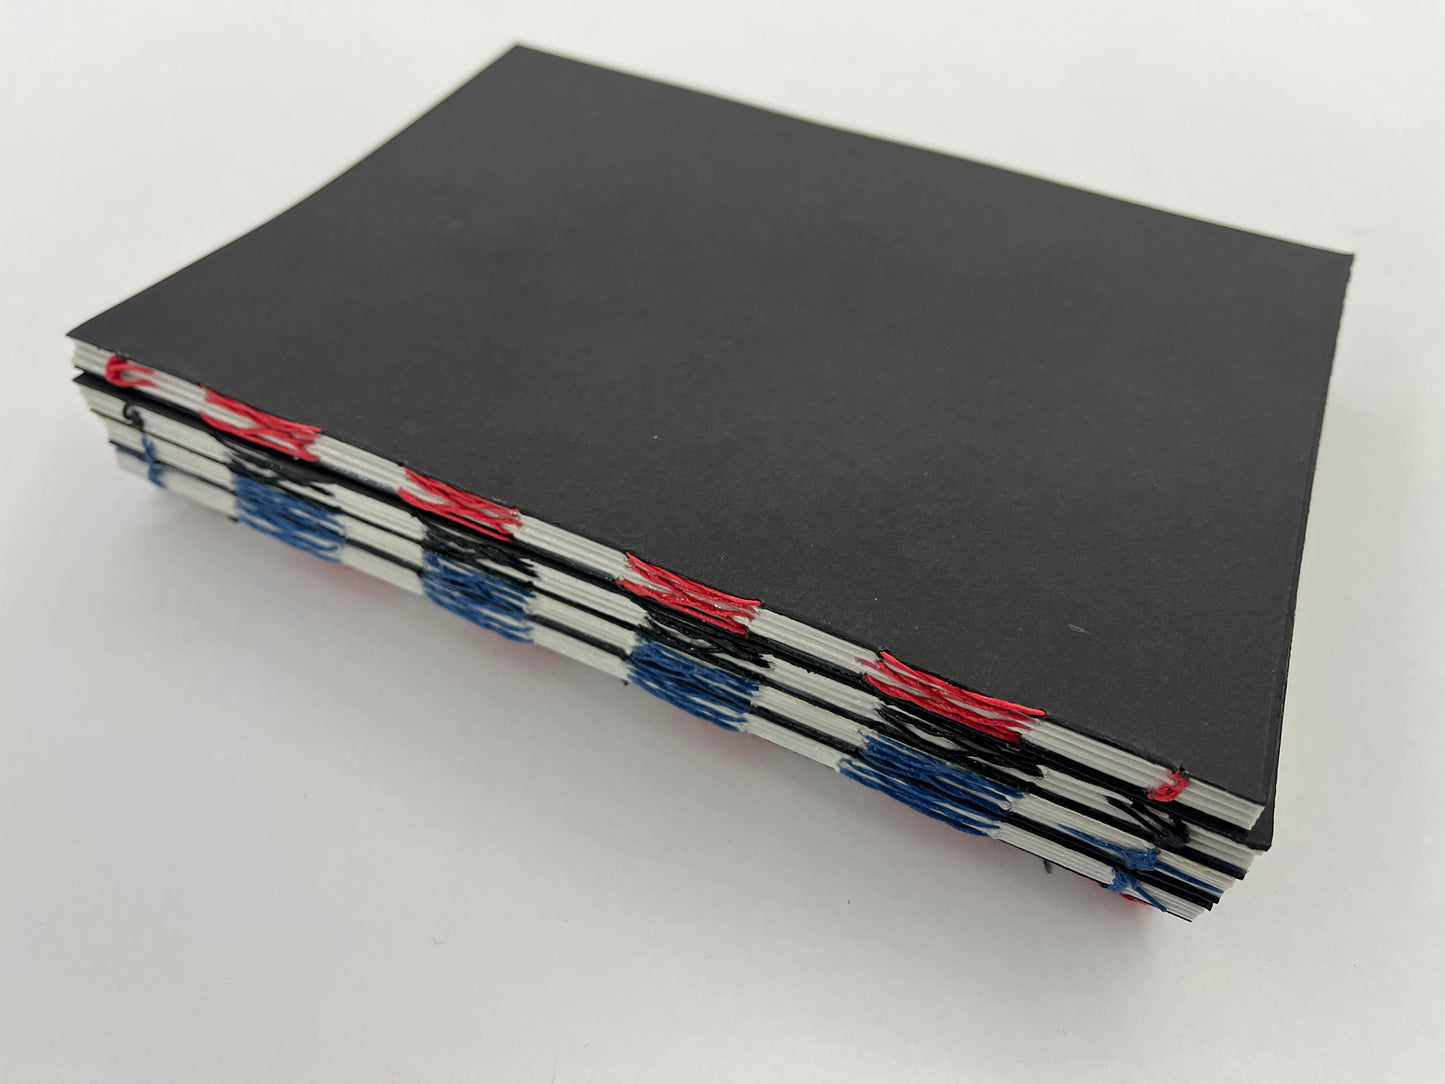 Handmade Note Books  - 100 pages